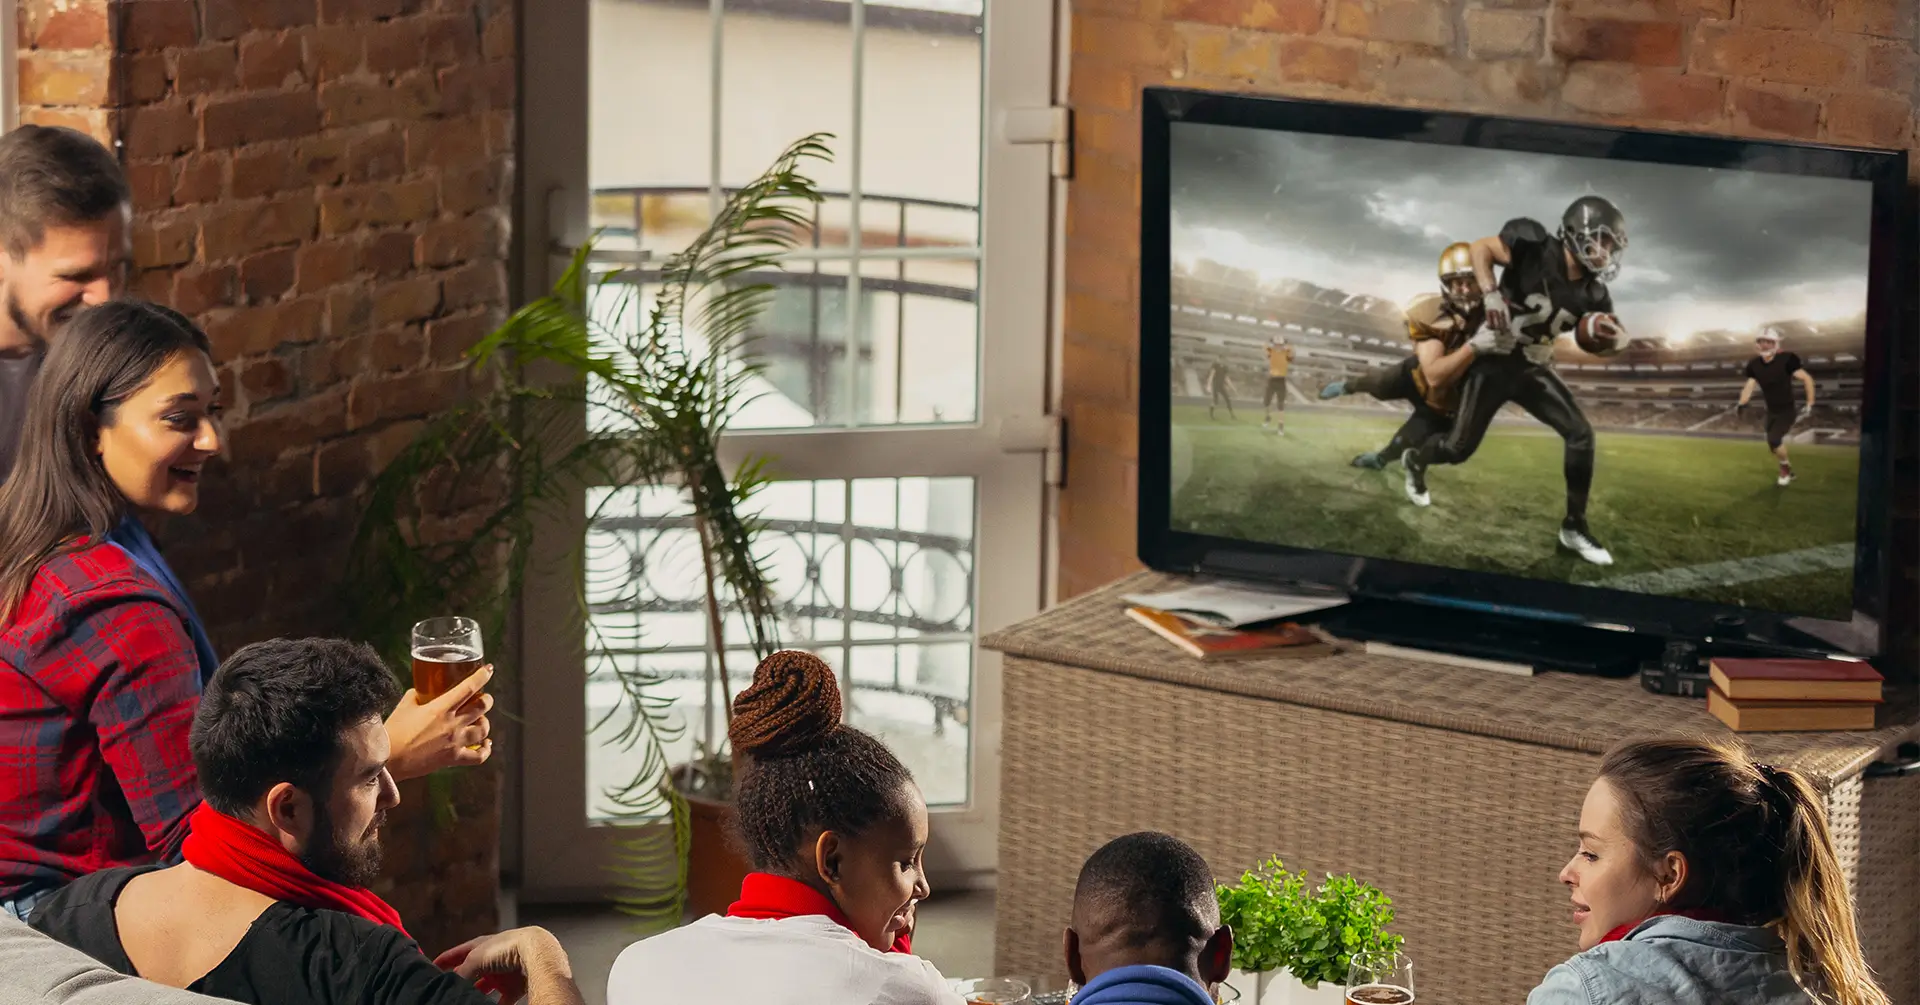 Some of the Best VIPBox alternatives to watch sports online